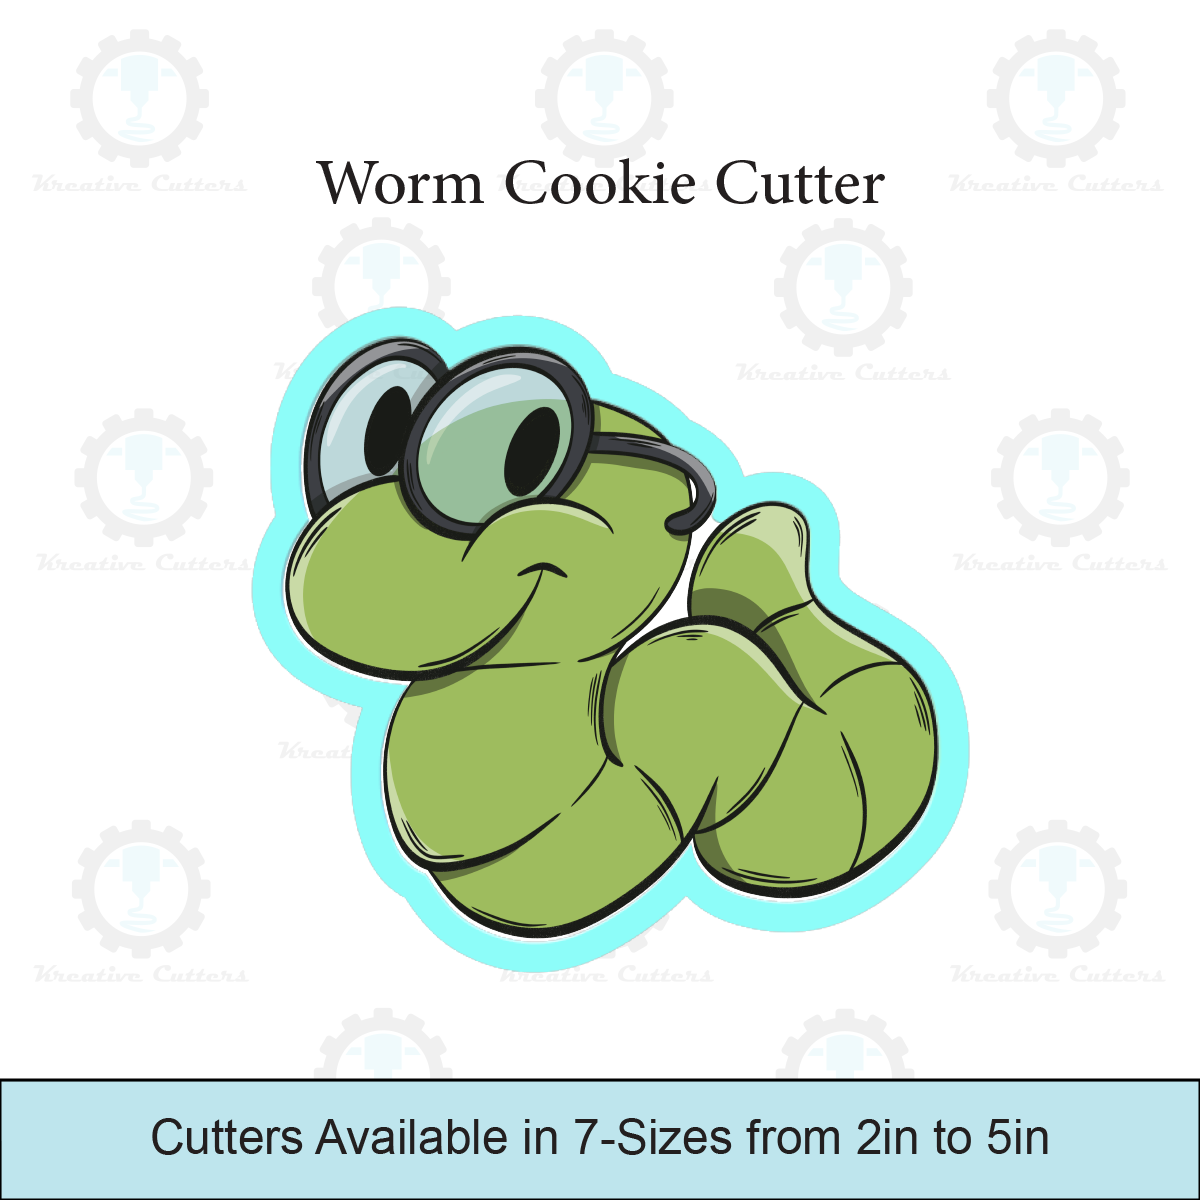 Worm Cookie Cutters